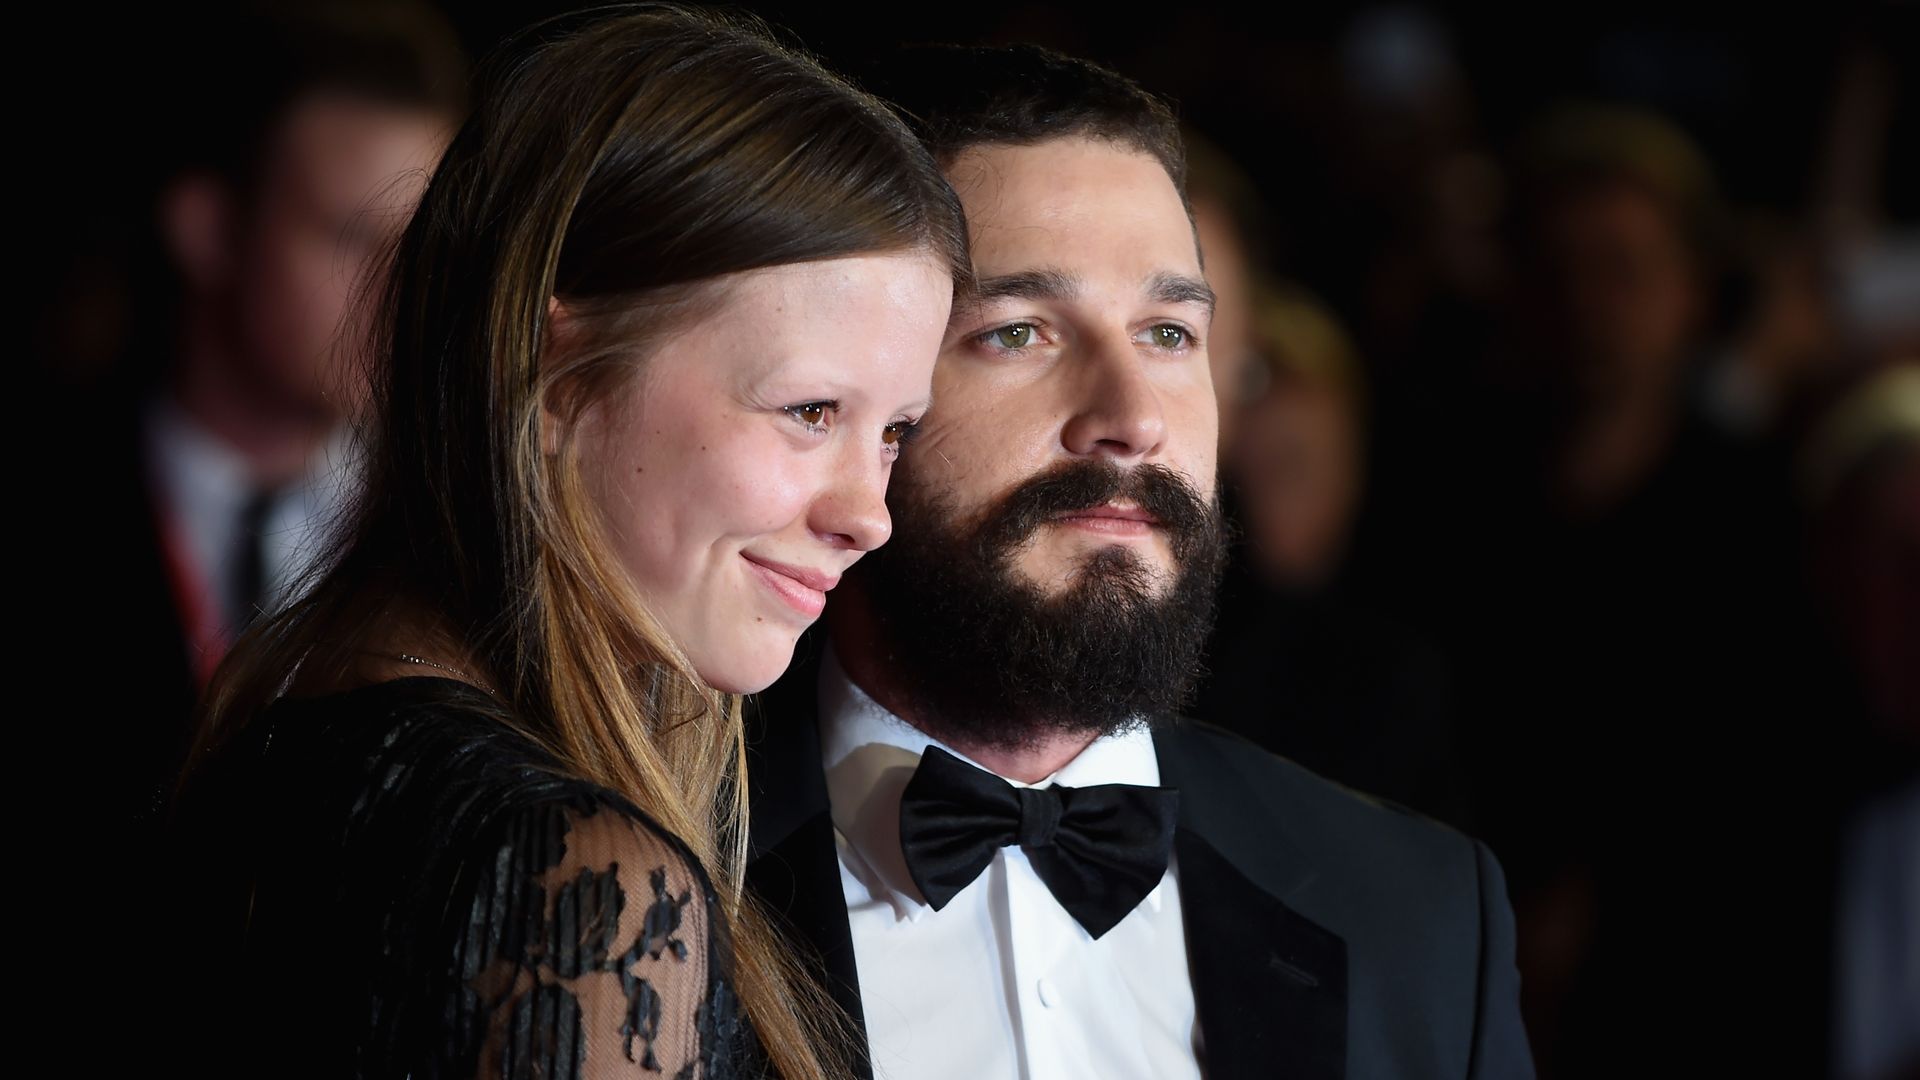 What we know about MaXXXine star Mia Goth and her family with Shia Labeouf